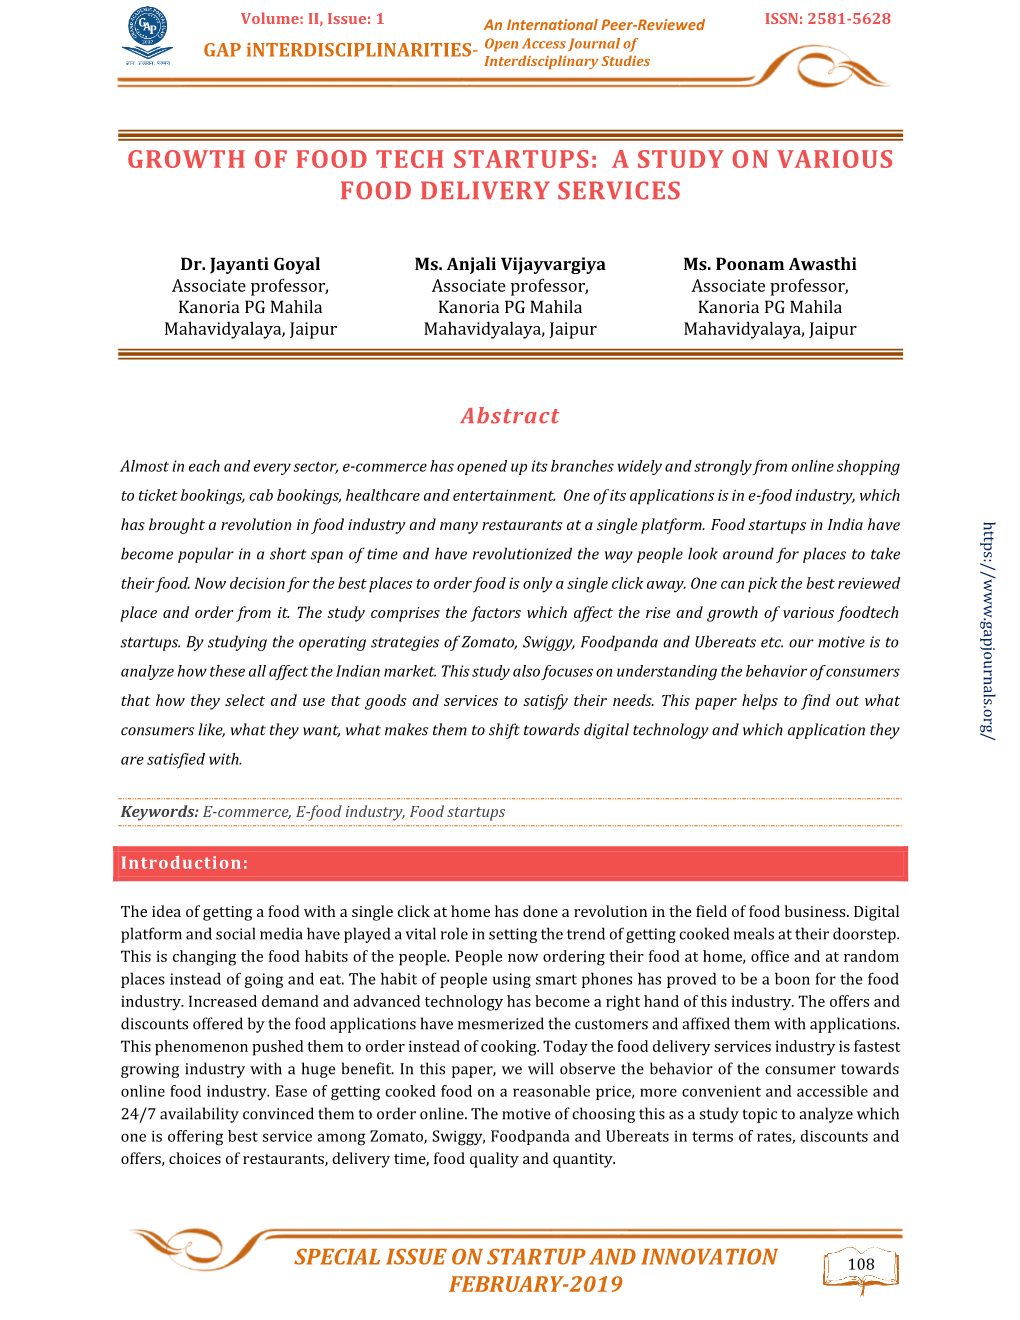 A Study on Various Food Delivery Services